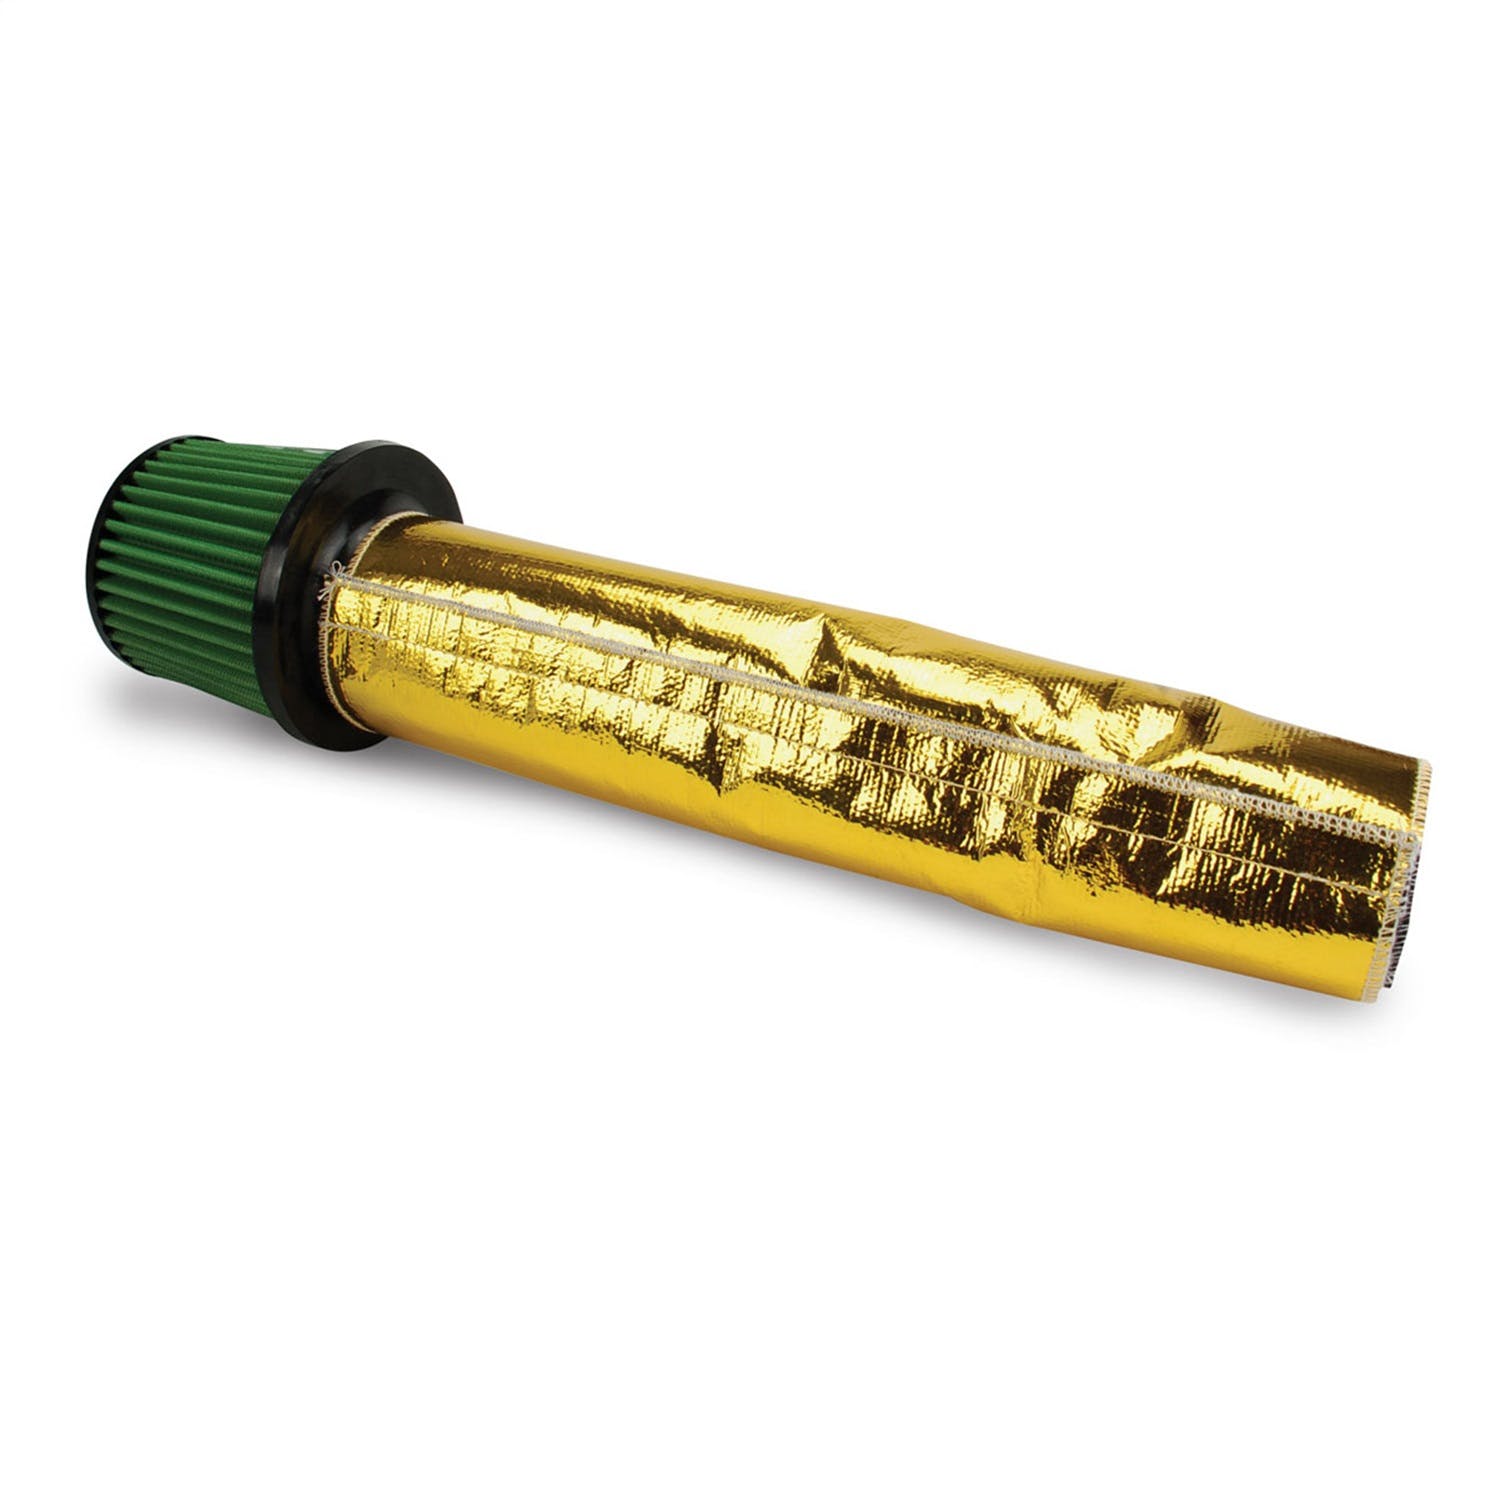 Design Engineering, Inc. 10486 Cool Cover Gold - 14 w x 28 - Air-Tube Cover Kit